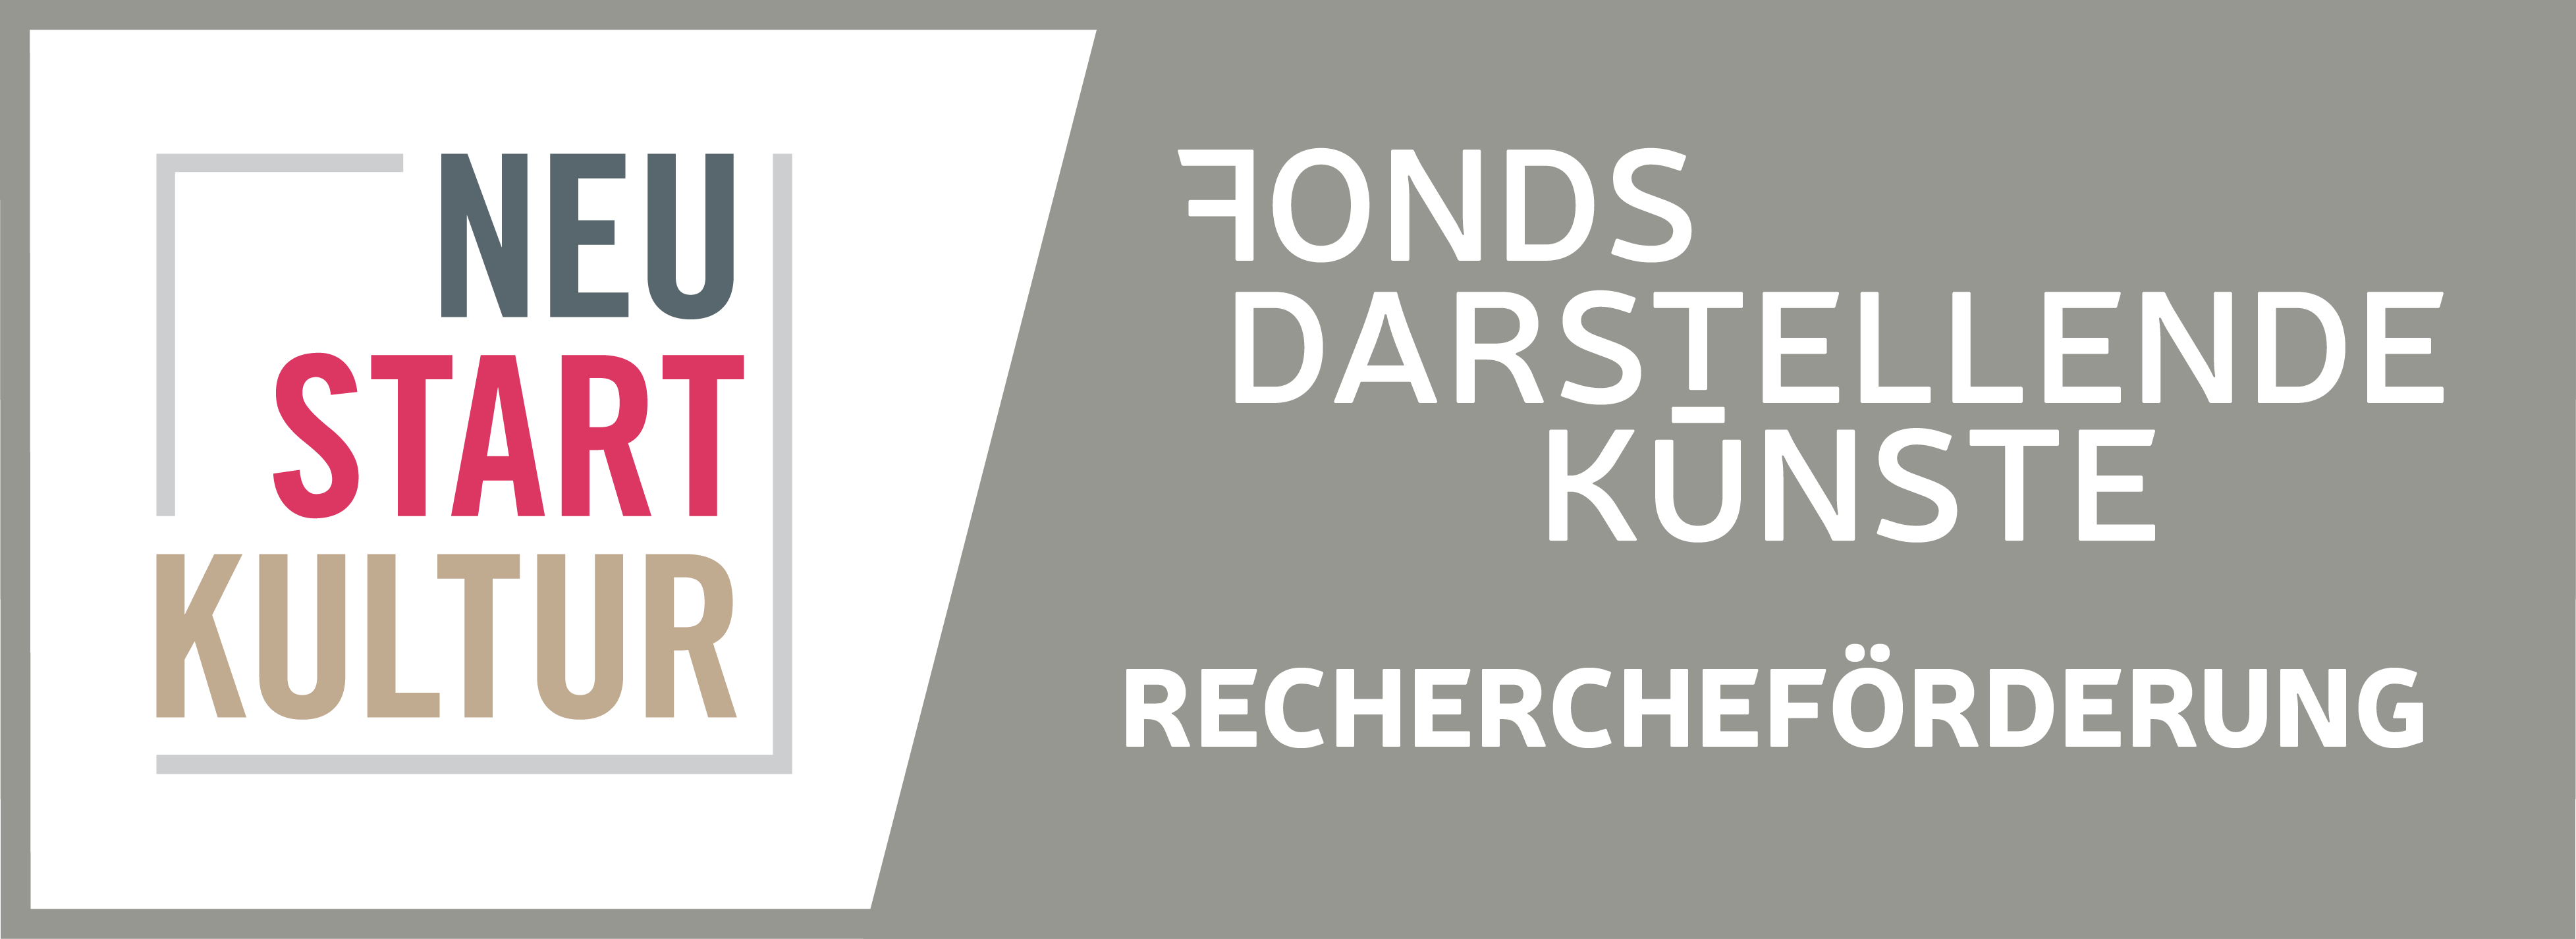 Supported by Fonds Darstellende Künste with funds from the Federal Government Commissioner for Culture and Media within the program NEUSTART KULTUR